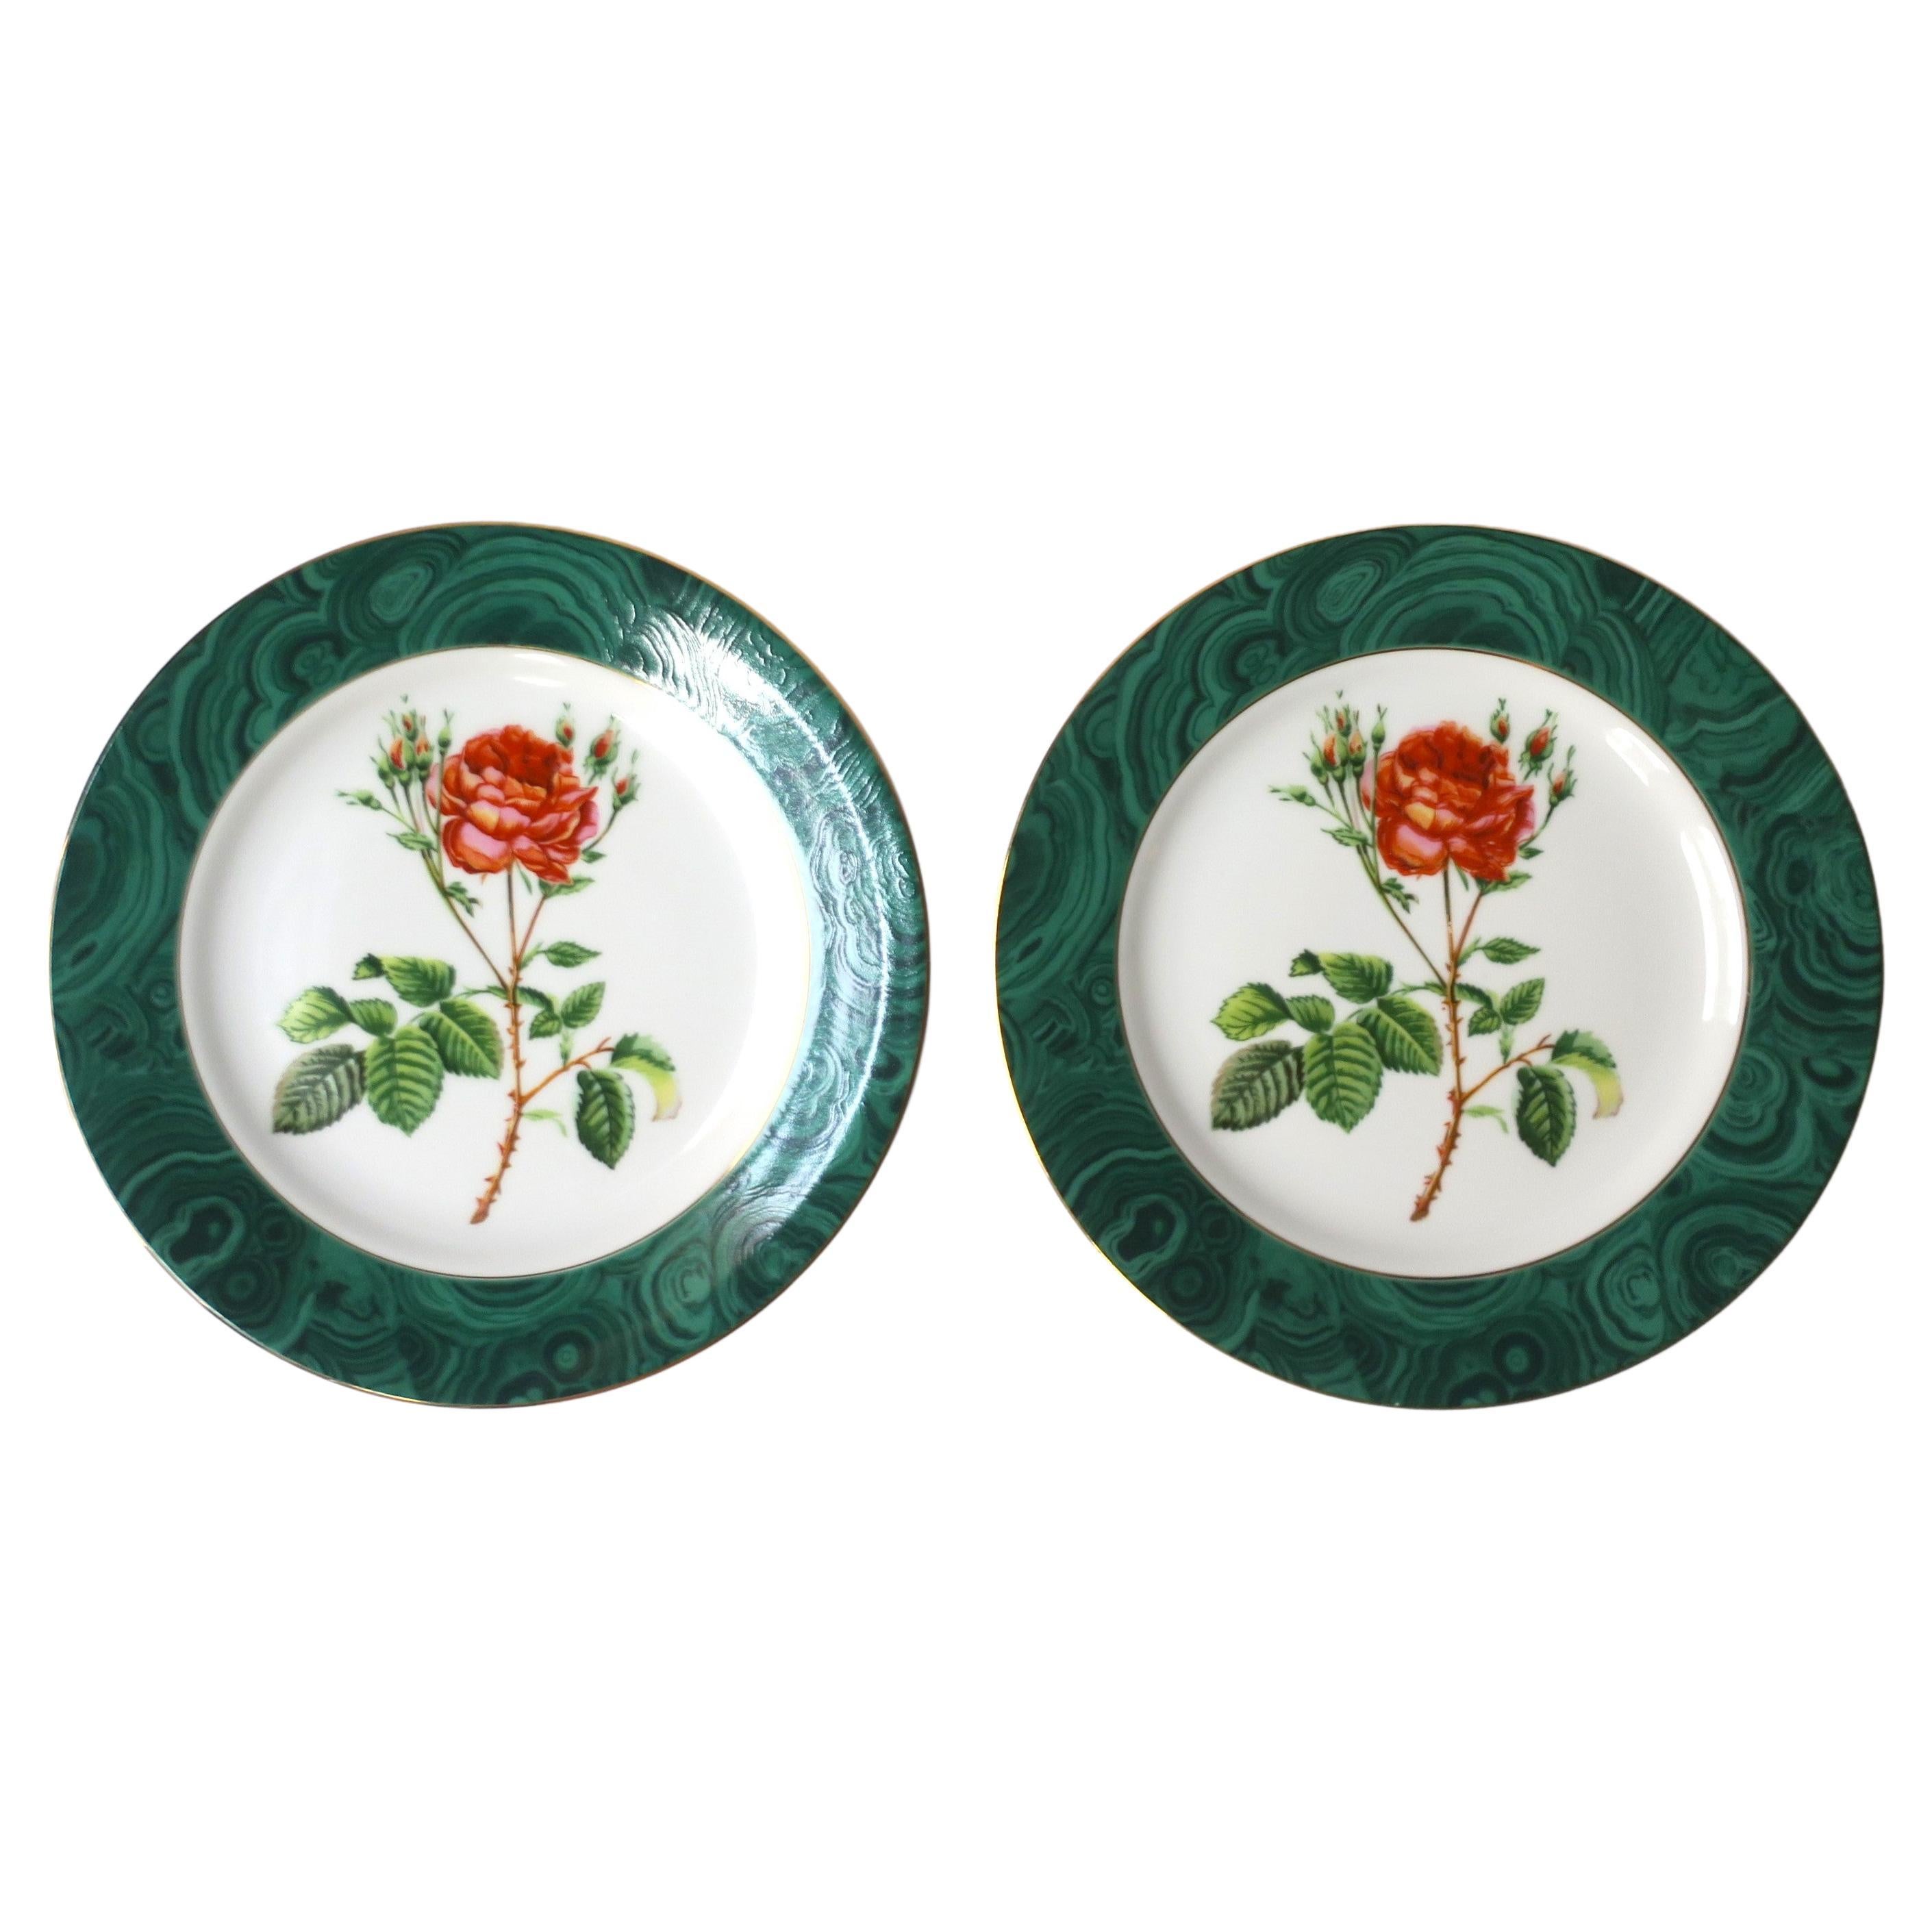 Green Malachite and Rose Chintz Porcelain Plates, Set of 2 For Sale